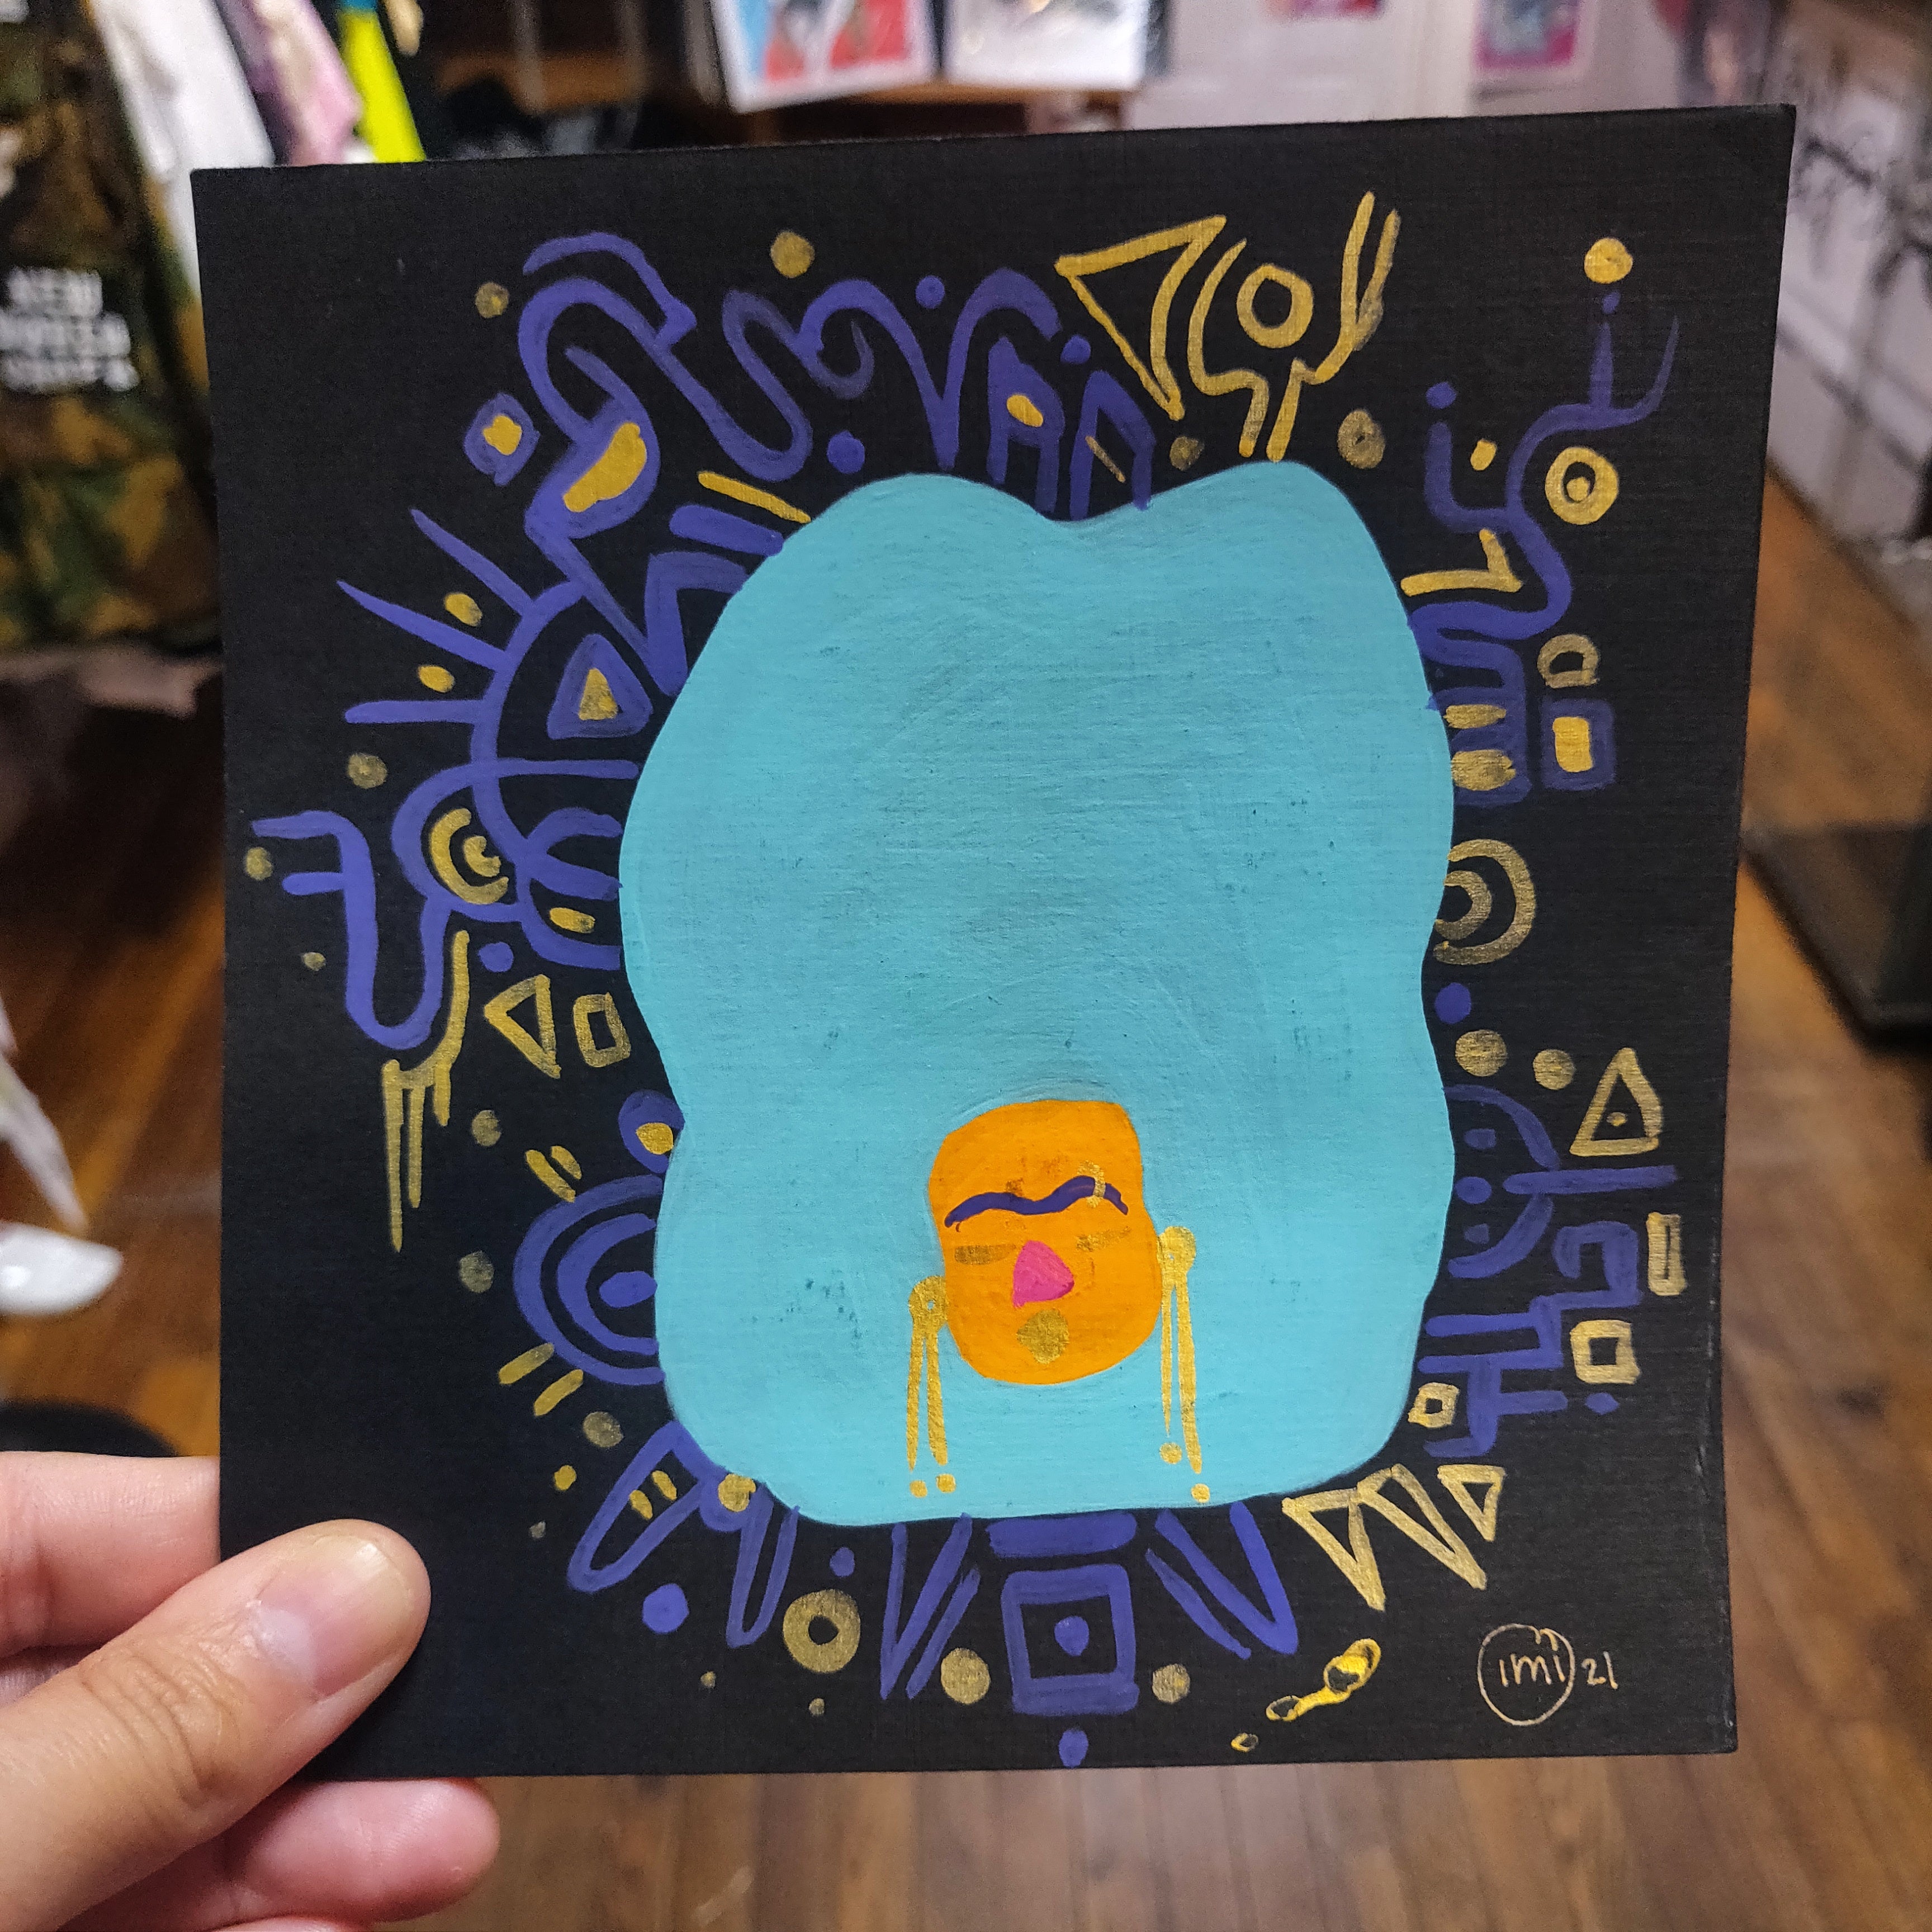 6x6" Hand-painted prints by Mimi